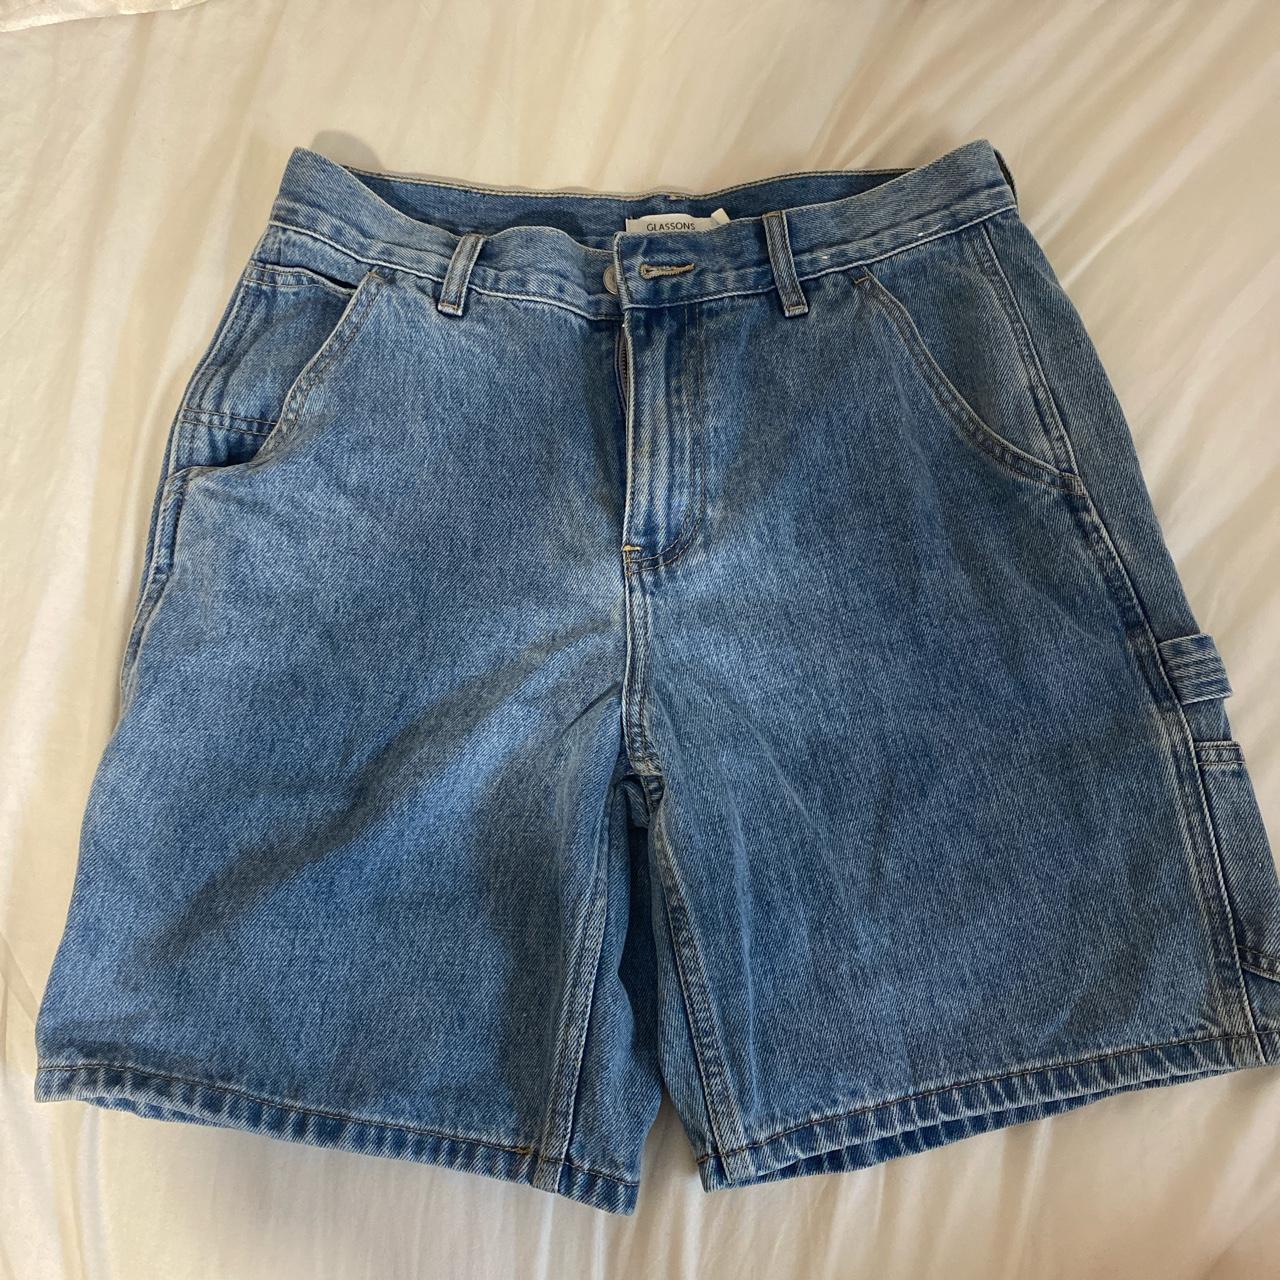 GLASSONS jorts not exactly as pictured in catalogue... - Depop